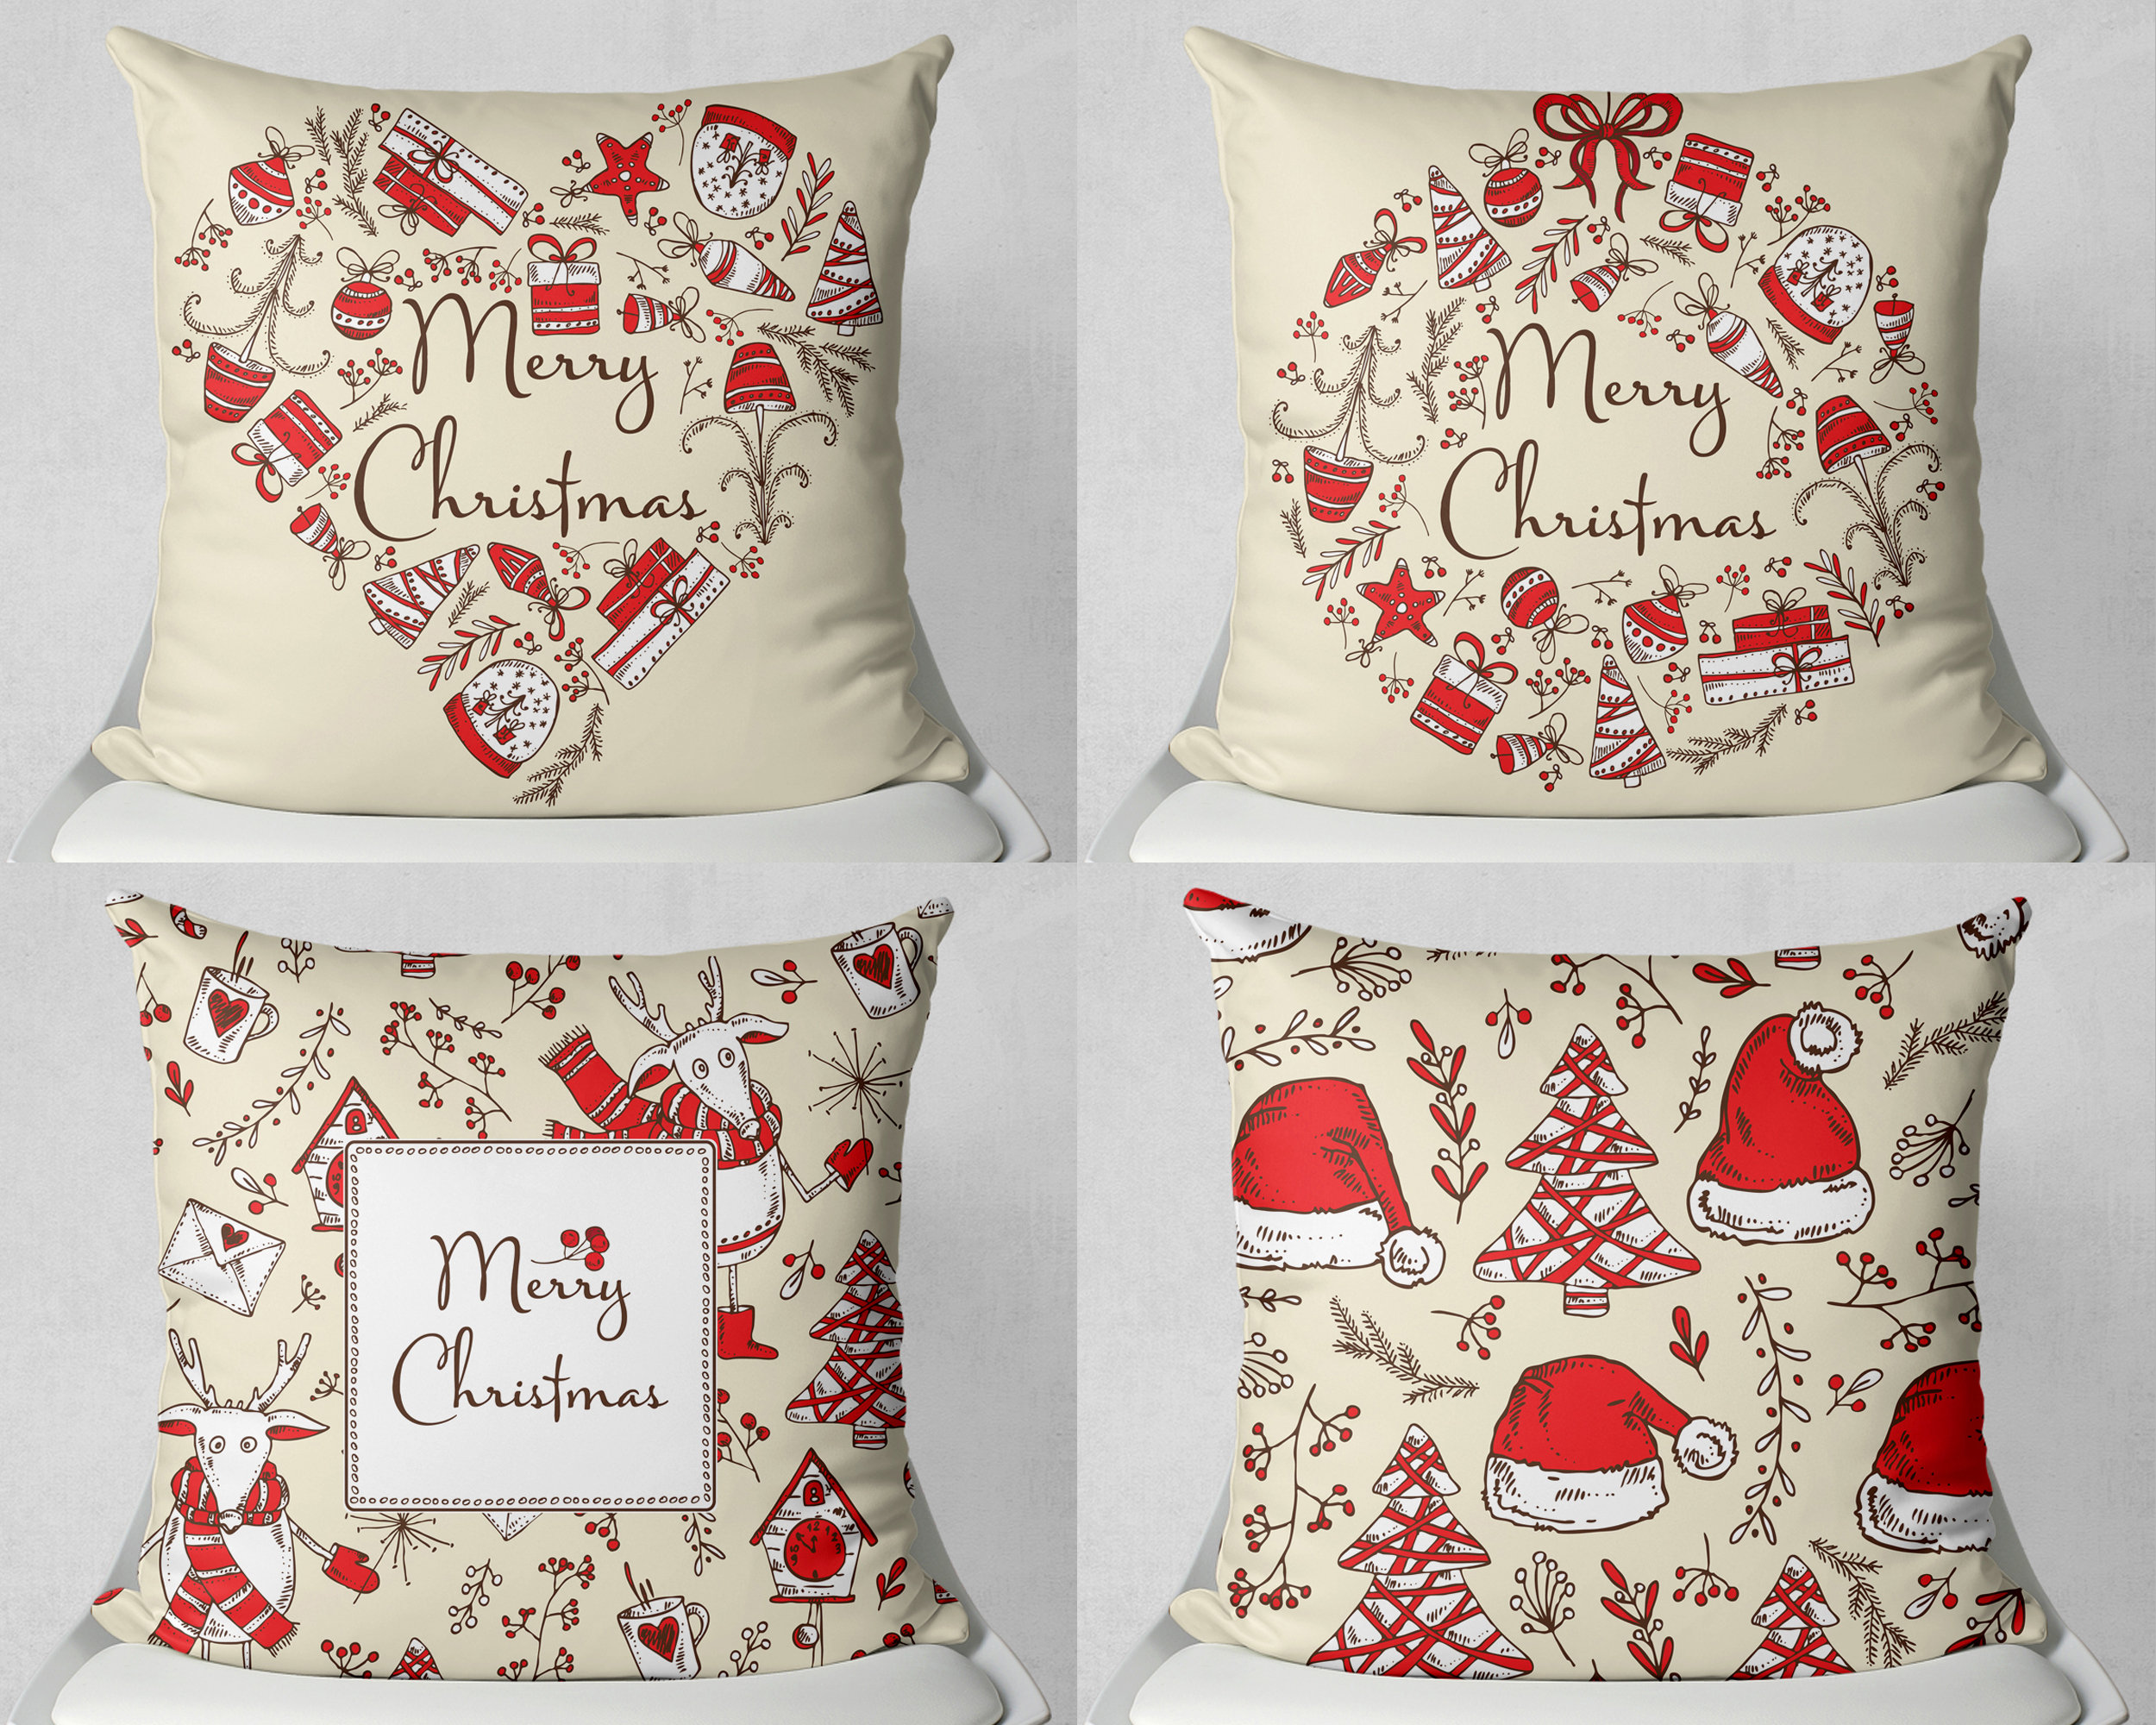 ATLINIA Christmas Pillow Covers 20x20 Set of 2 - Xmas Decorative Farmhouse  Linen Throw Pillow Cases Holiday Sofa Couch Cushion Covers Merry Christmas